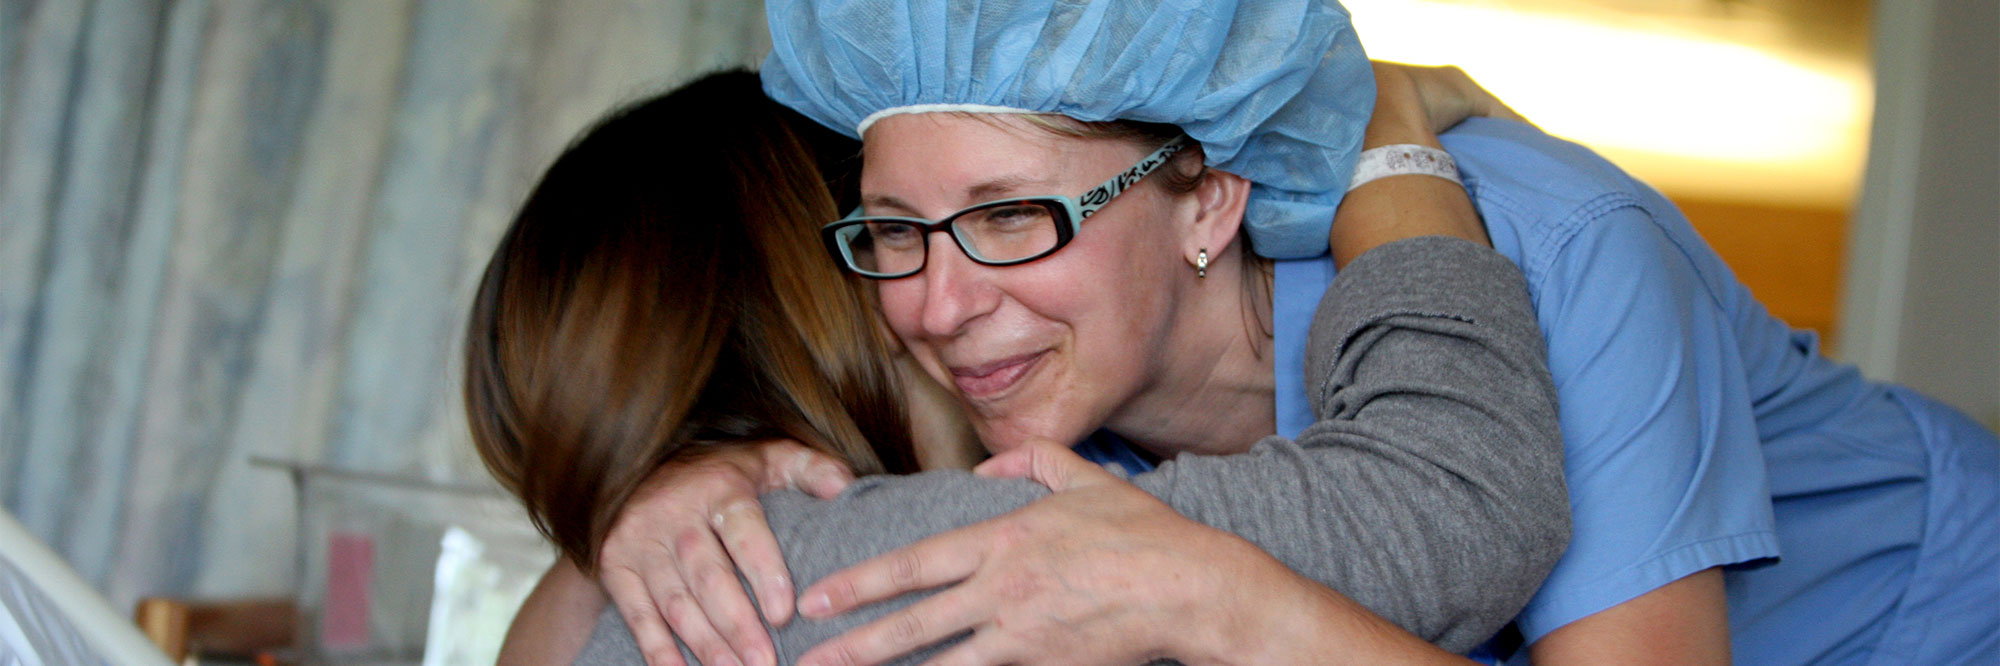 A smiling nurse hugs a patient in a hospital bed.